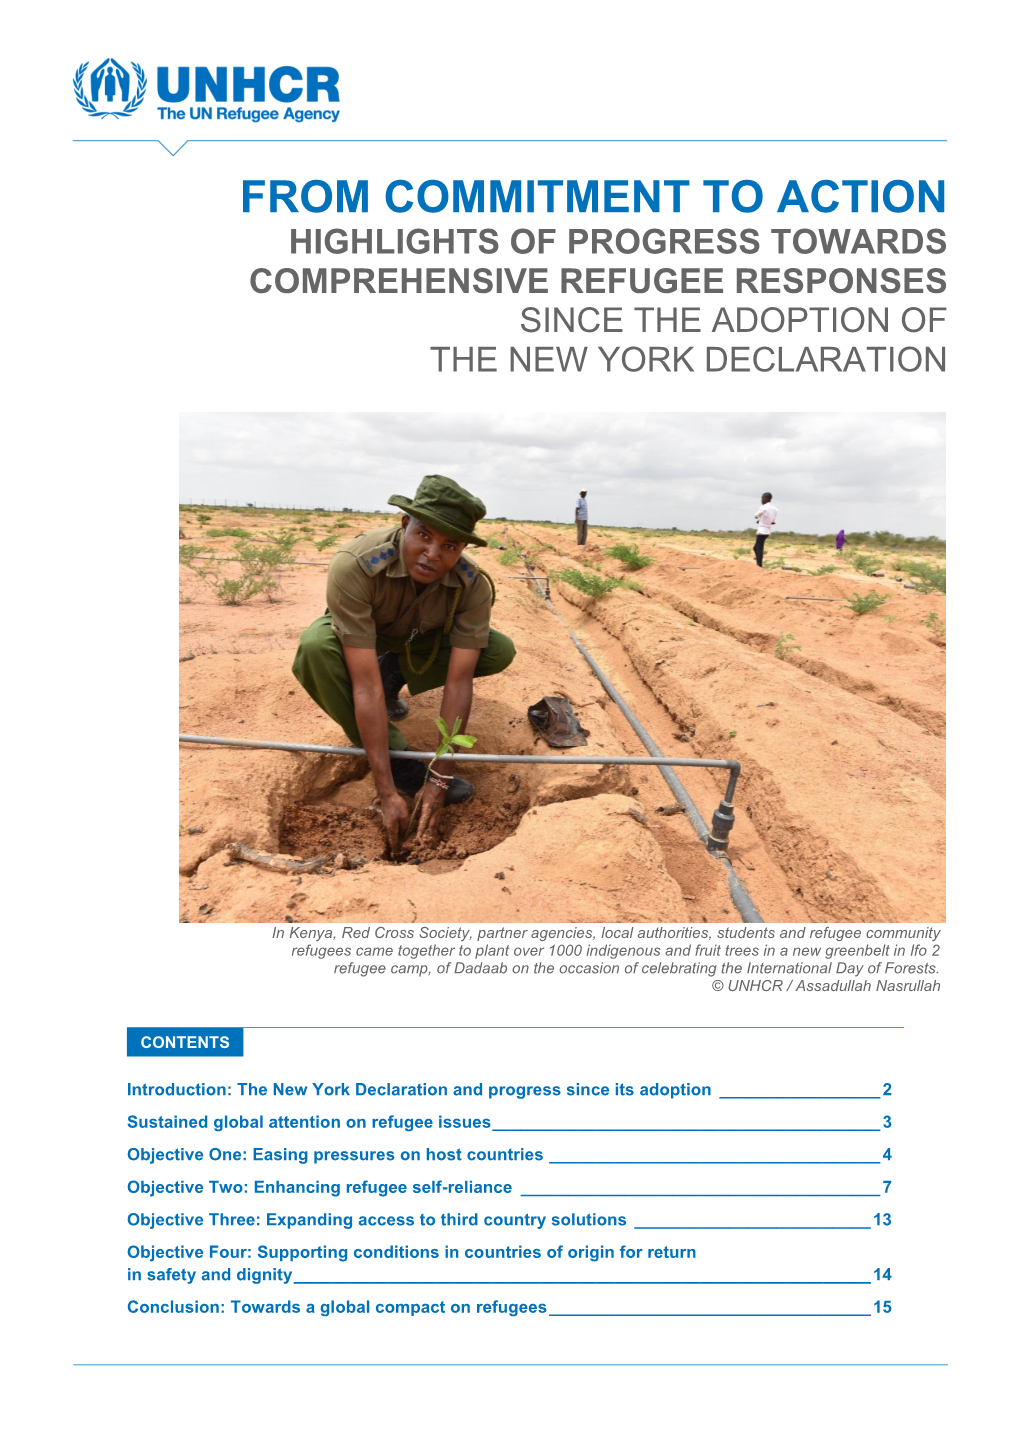 Highlights of Progress Towards Comprehensive Refugee Responses Since the Adoption of the New York Declaration